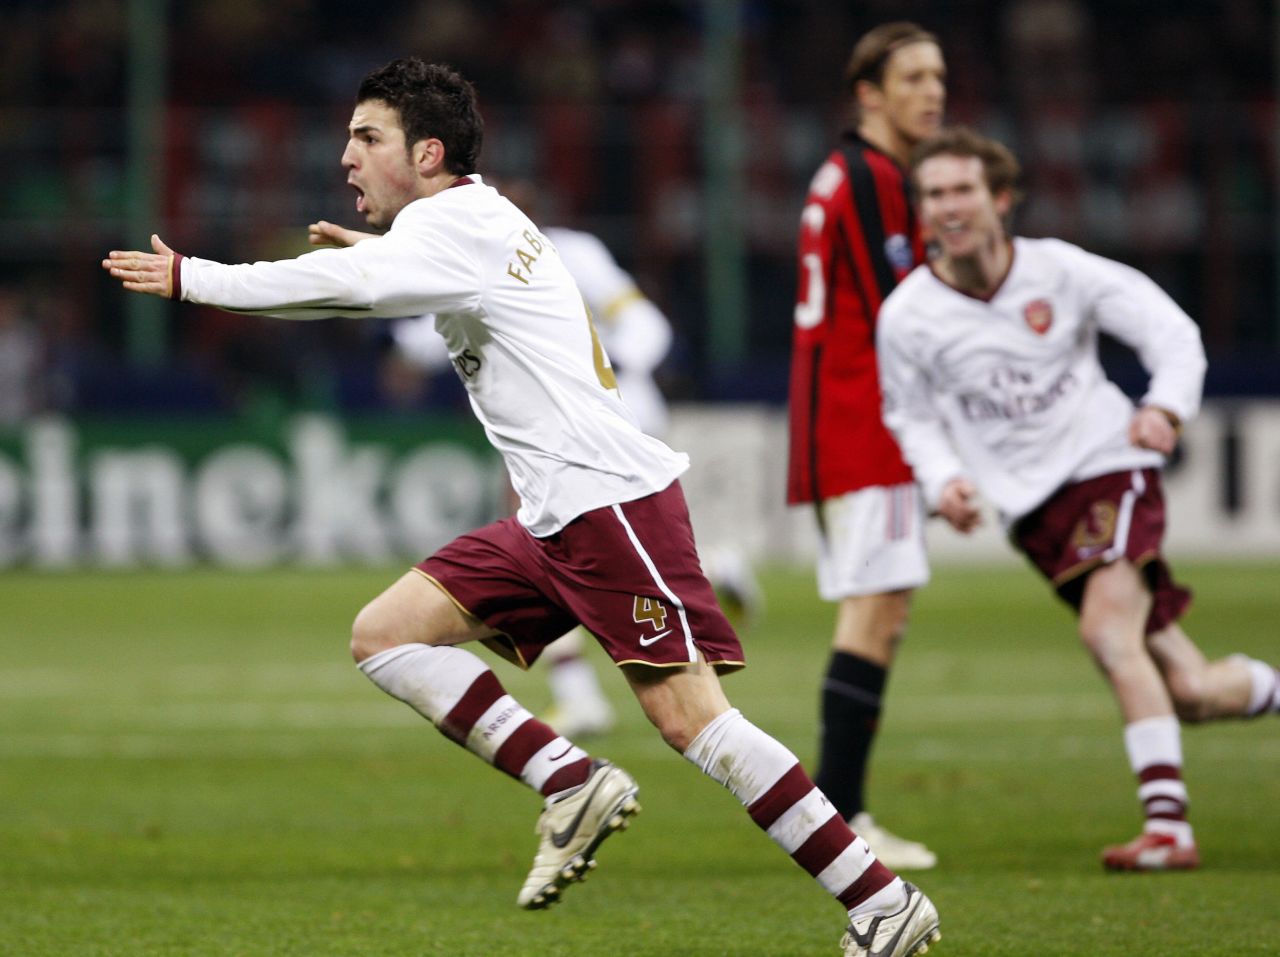 Arsenal eliminated AC Milan at the last 16 stage of the 2007/08 competition, goals from Emmanuel Adebayor and Cesc Fabregas handing Arsene Wenger's team a crucial 2-0 second-leg victory at the San Siro.